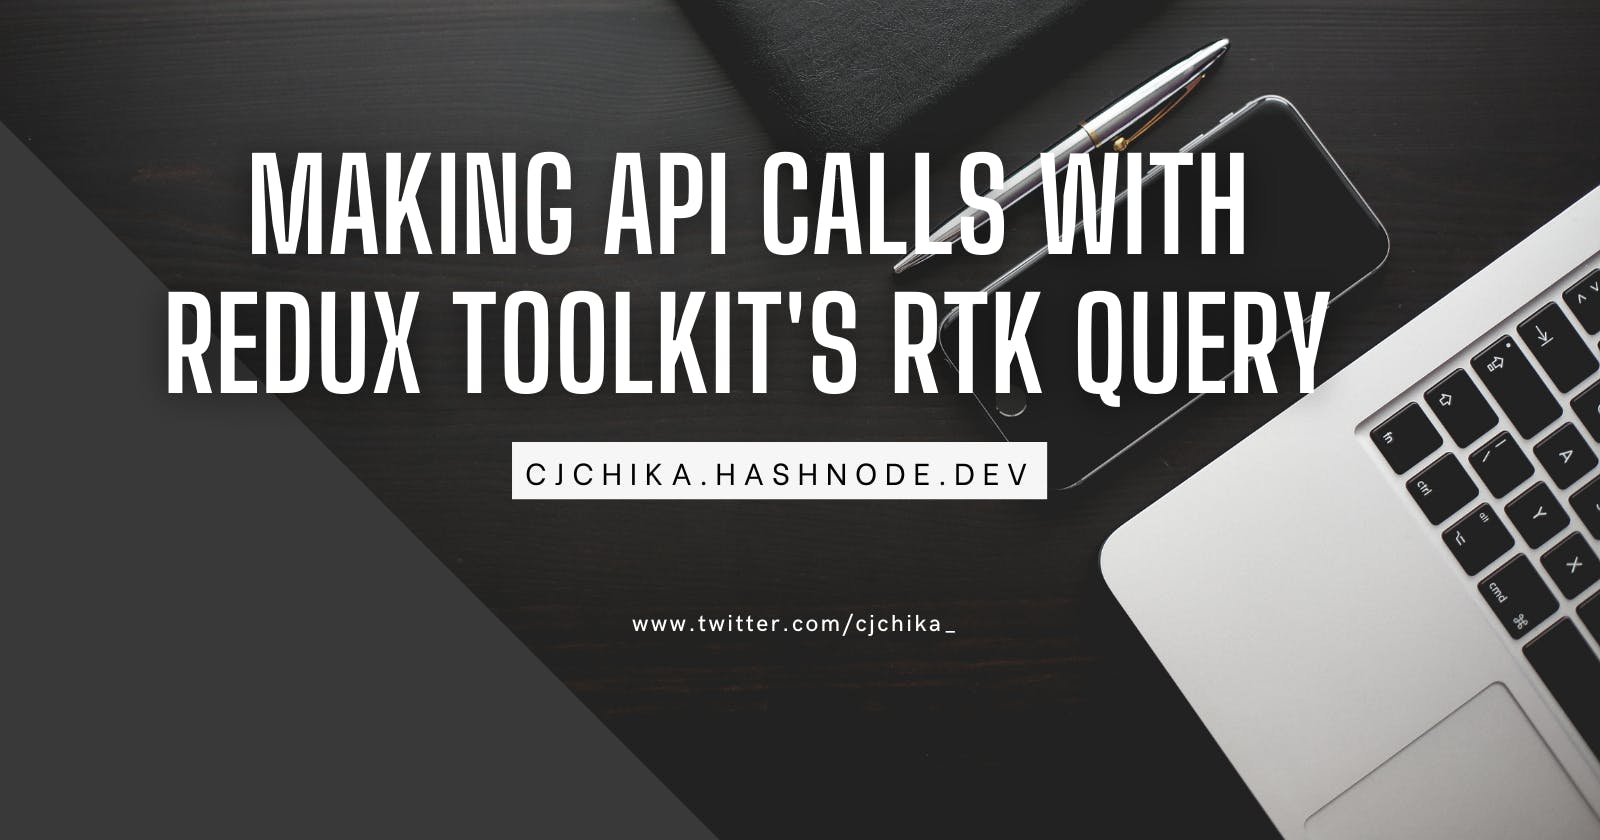 Making API Calls with Redux Toolkit's RTK Query